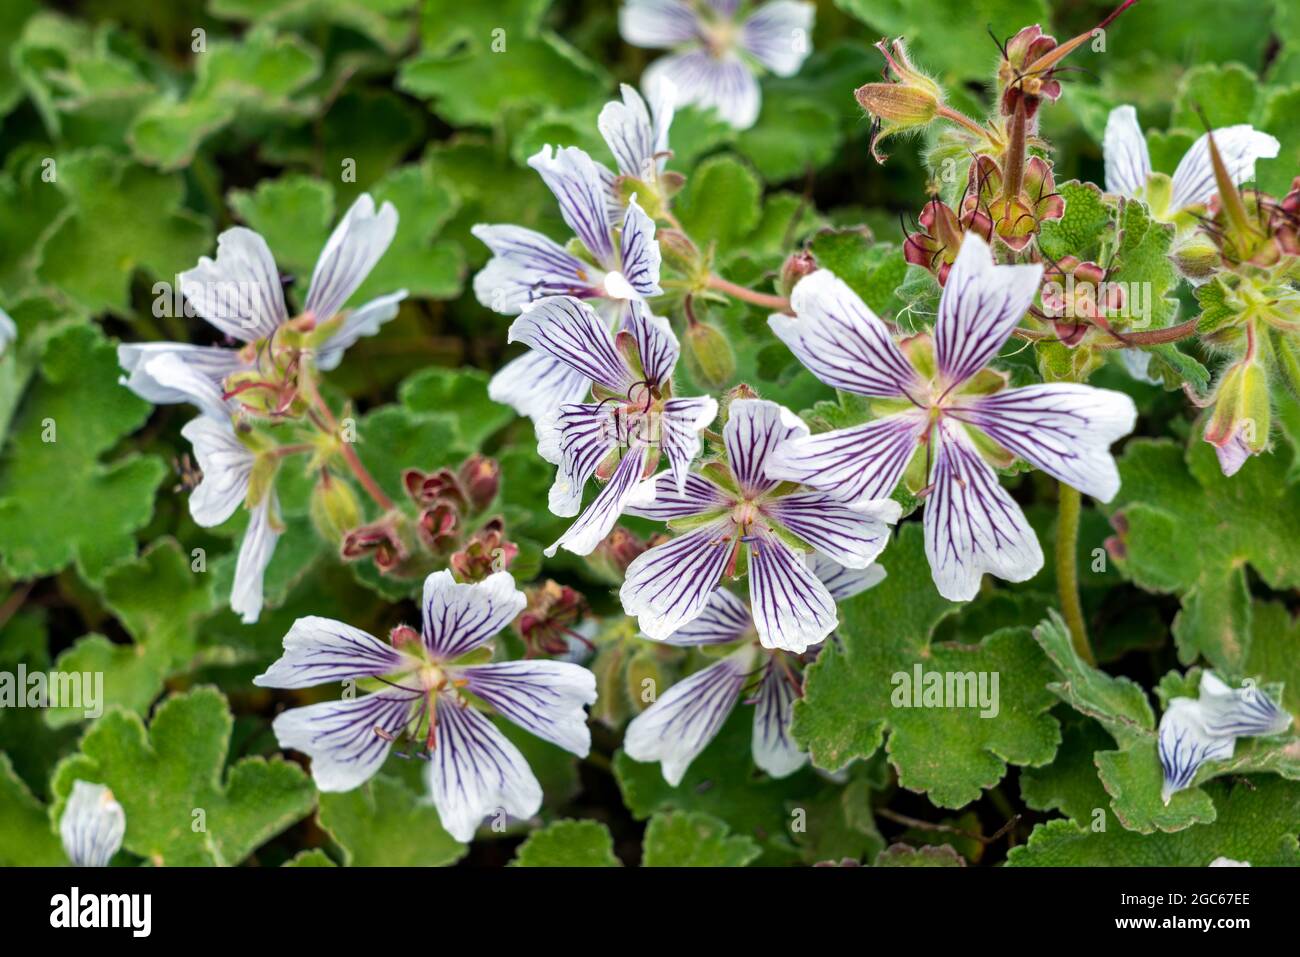 Geranium renardii a spring summer flowering plant with a pale white and mauve purple summertime flower commonly known as Renard Geranium or Caucasian Stock Photo